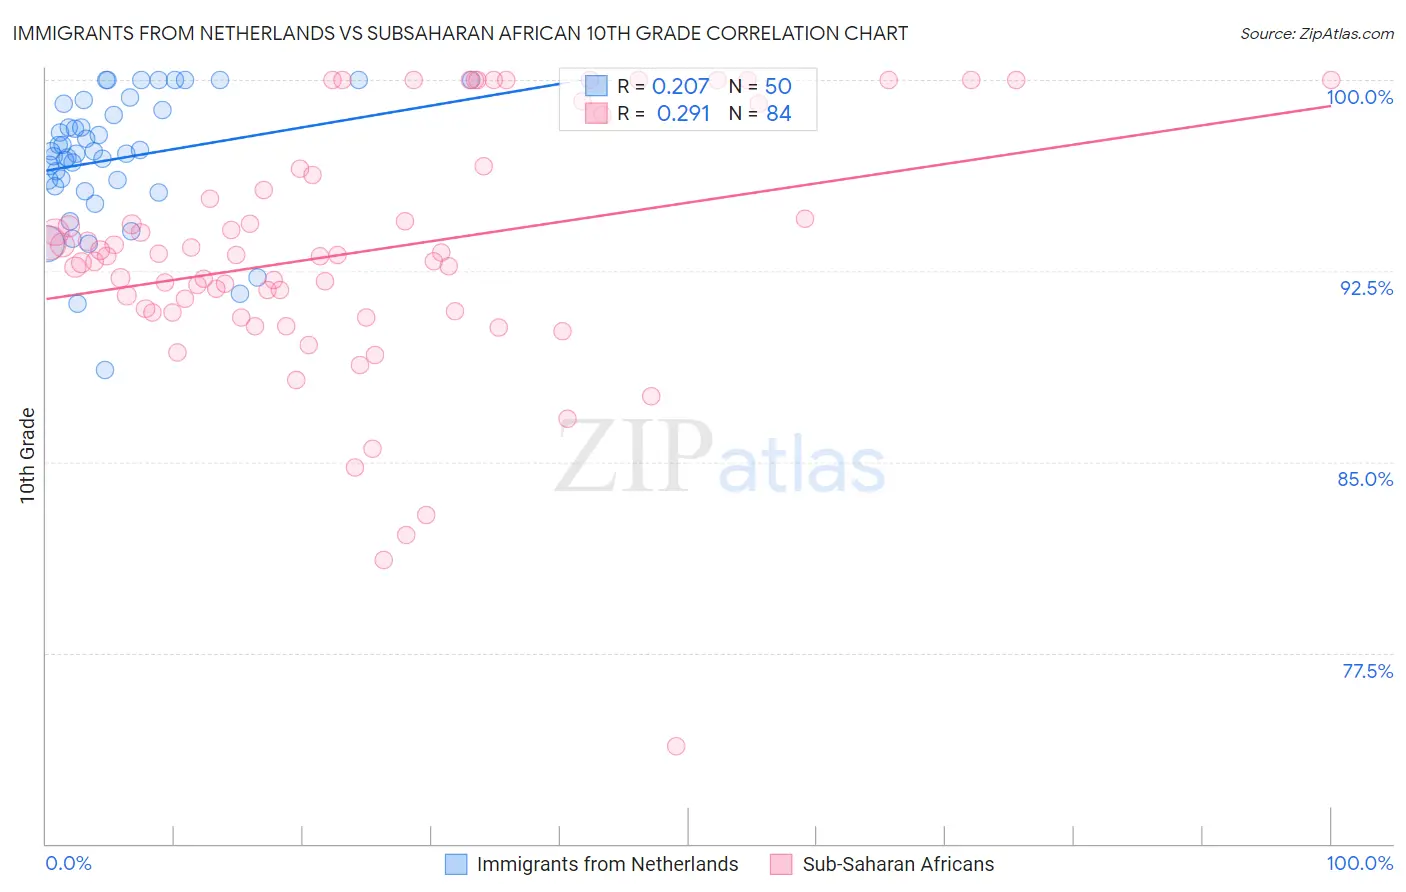 Immigrants from Netherlands vs Subsaharan African 10th Grade